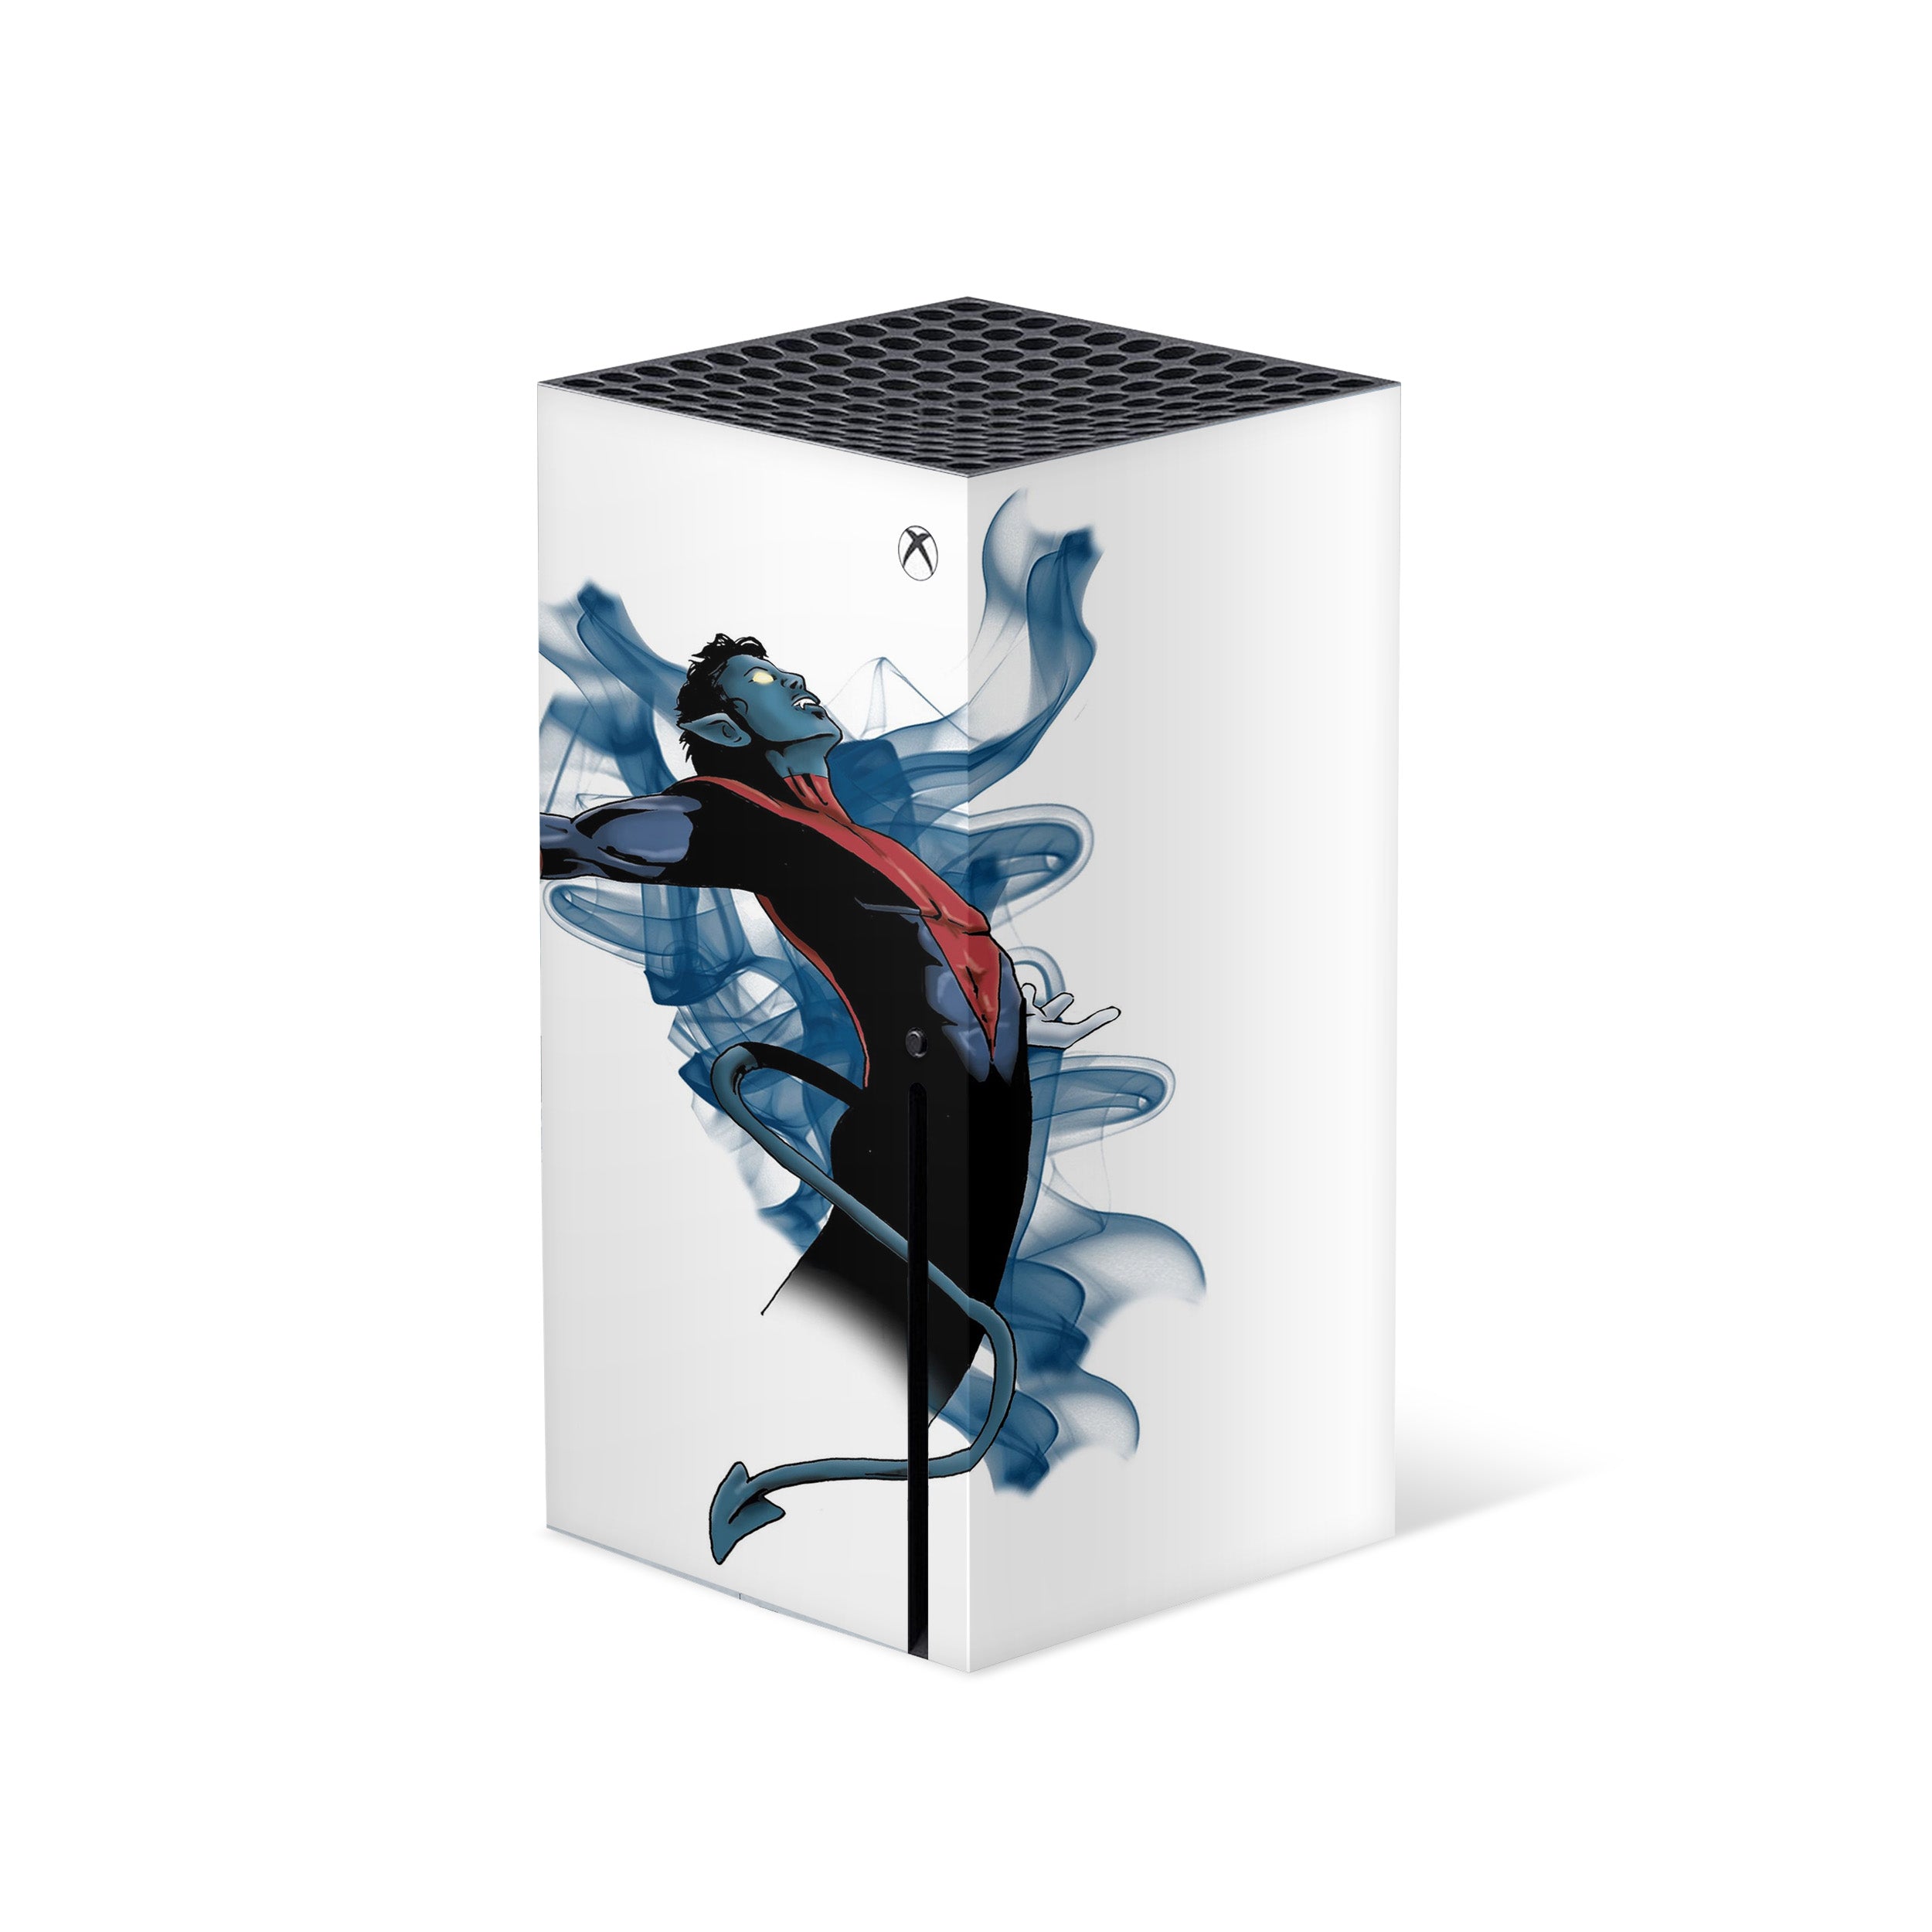 A video game skin featuring a Marvel X Men Nightcrawler design for the Xbox Series X.